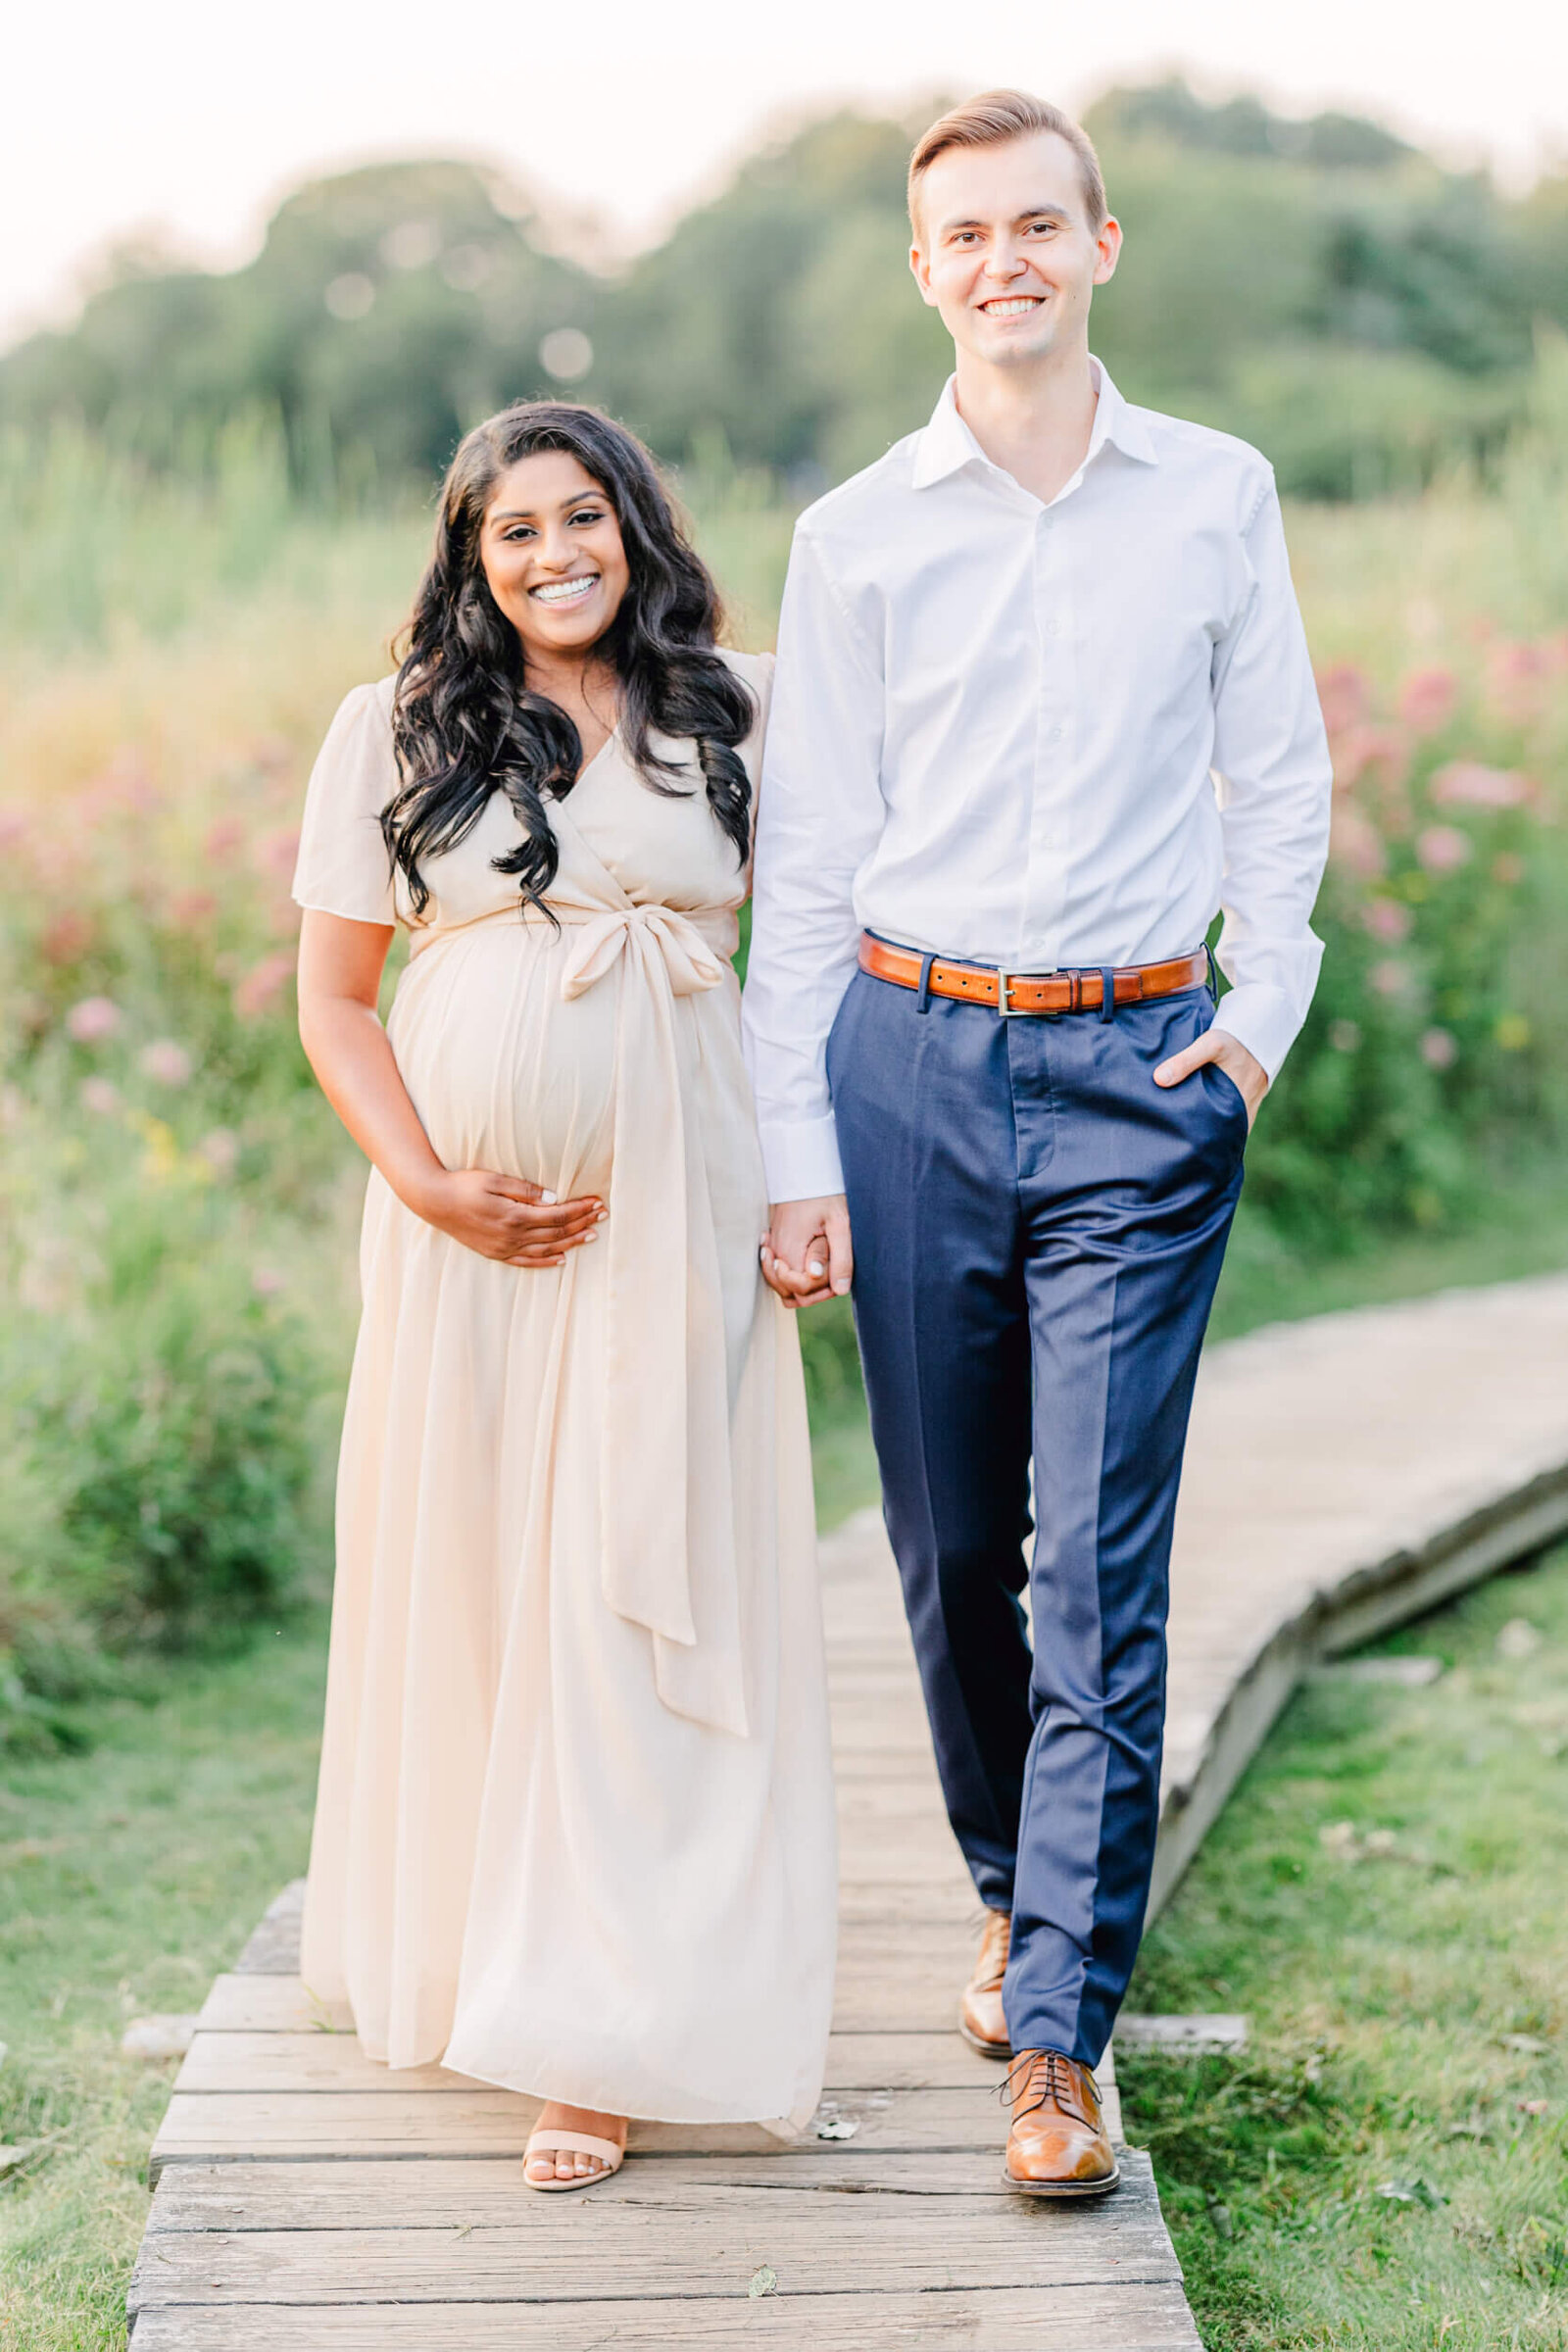 Pregnant woman and her husband smiling, holding hands, and walking